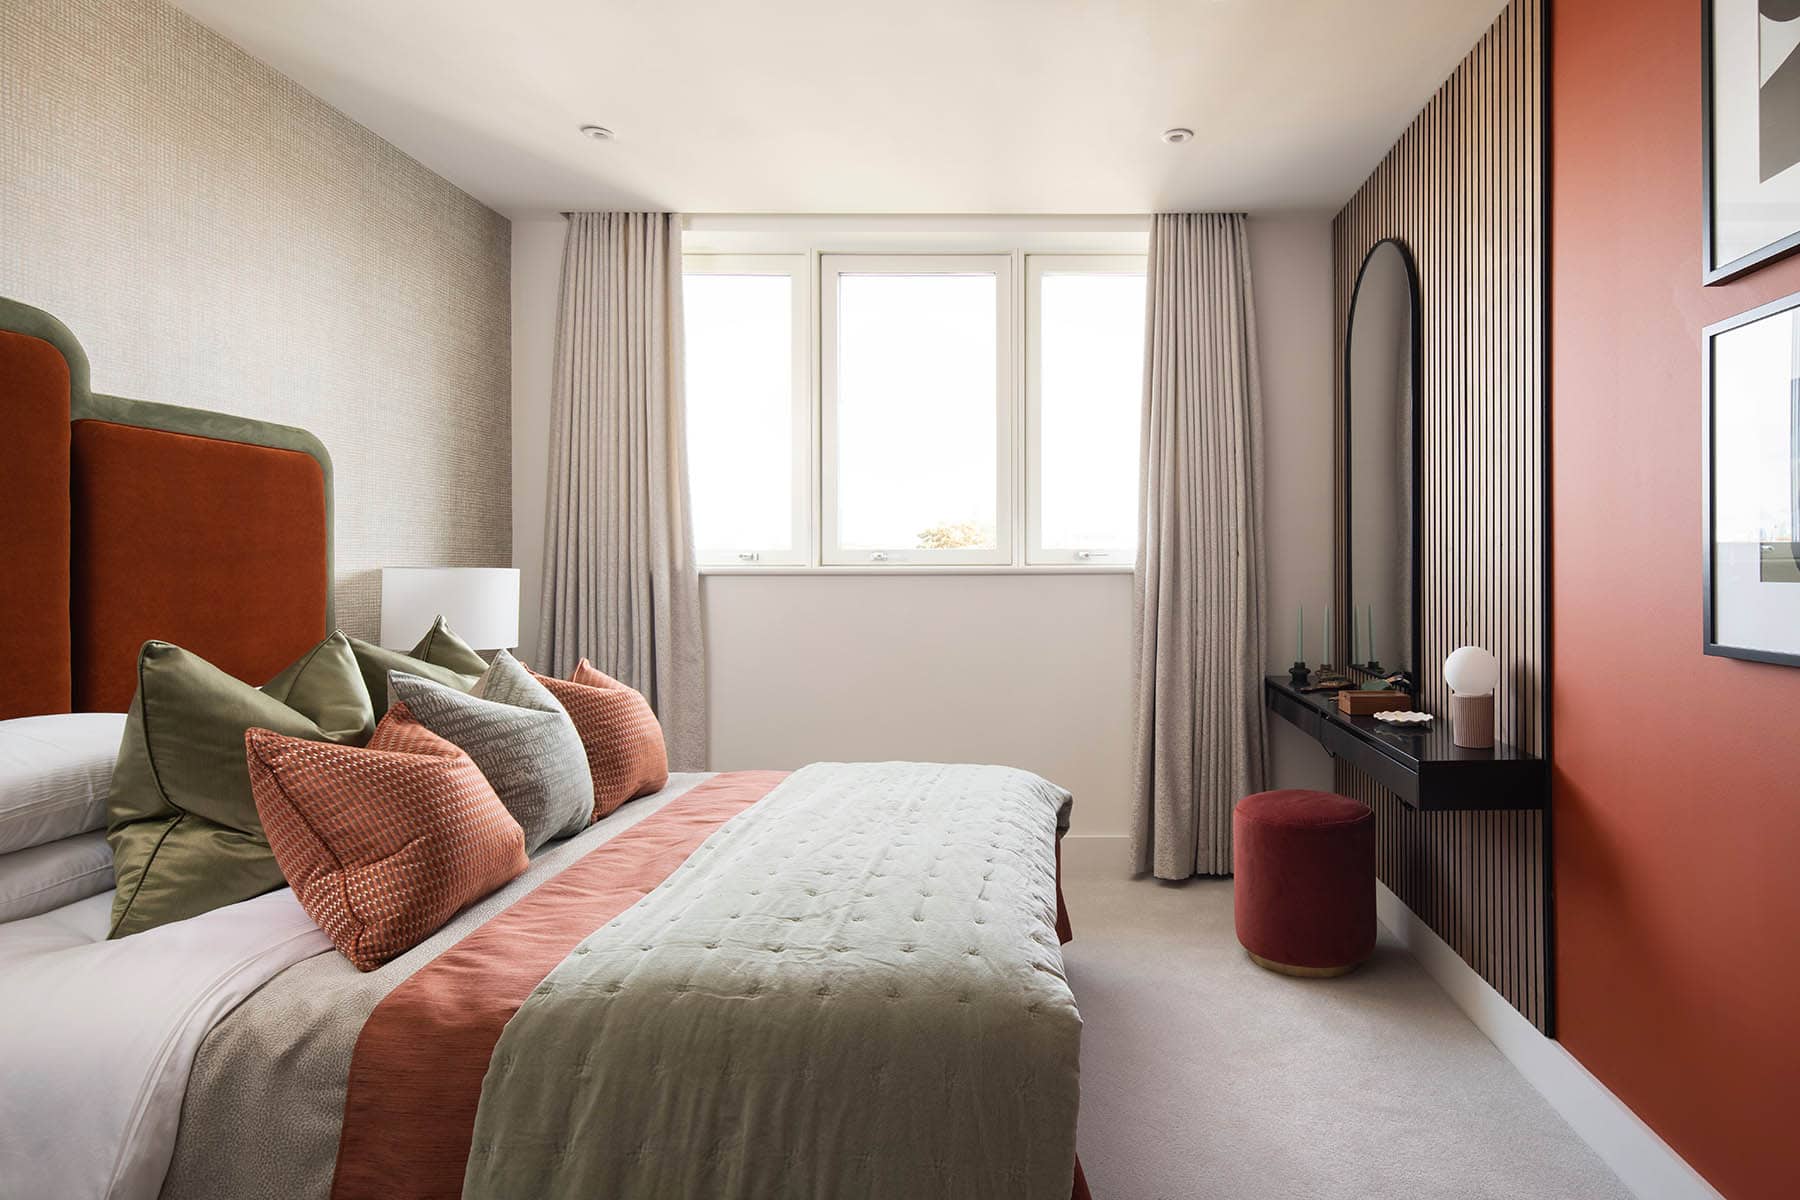 Image of a bedroom at the Higgs Yard development from Peabody New Homes - available to purchase through Shared Ownership on Share to Buy!